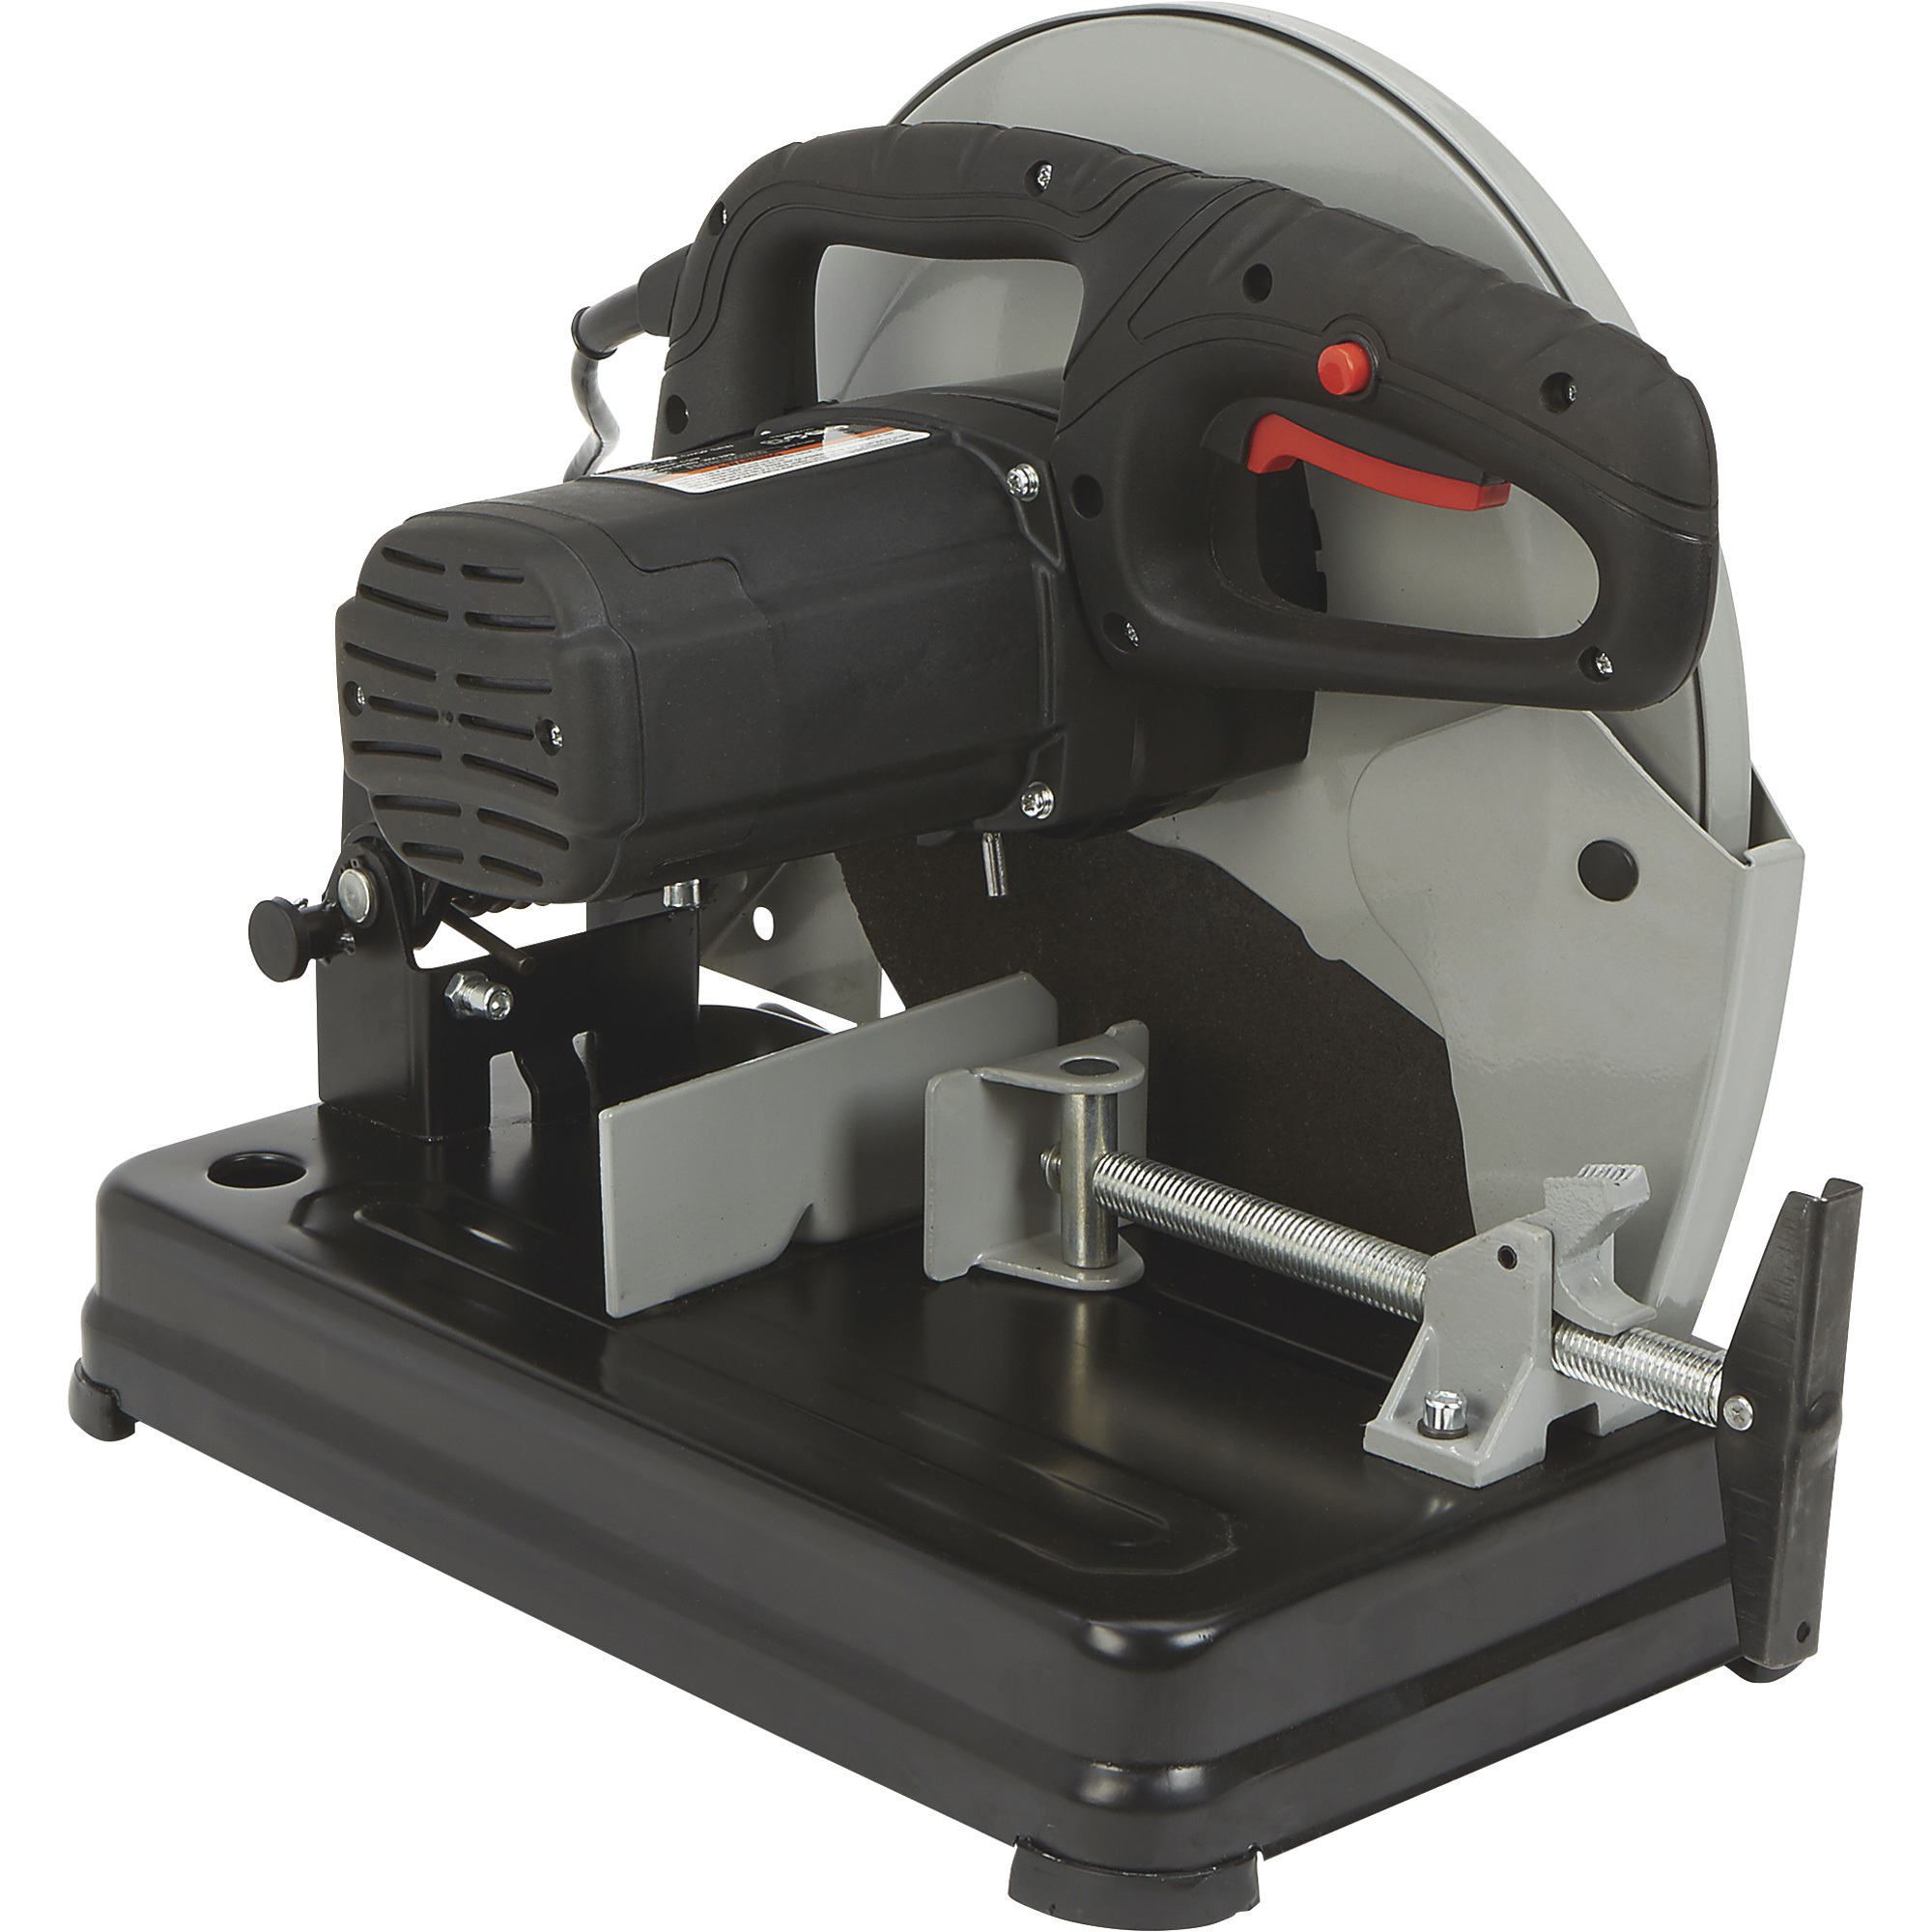 Please see replacement Item# 4975091. Ironton Abrasive Chop Saw — 14in., 15  Amp Northern Tool